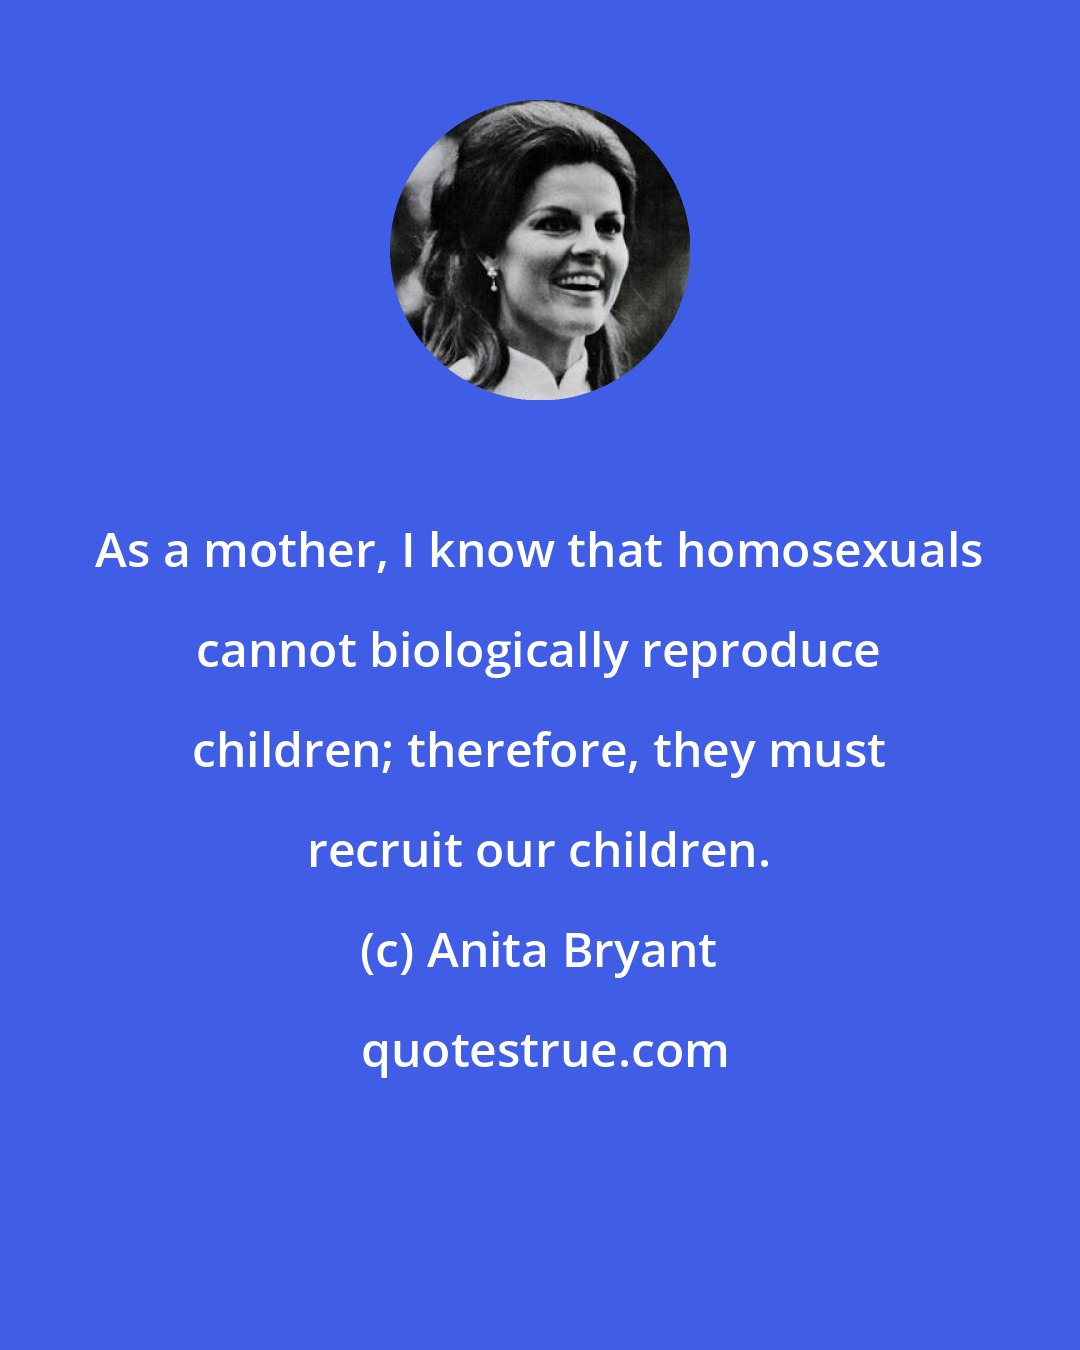 Anita Bryant: As a mother, I know that homosexuals cannot biologically reproduce children; therefore, they must recruit our children.